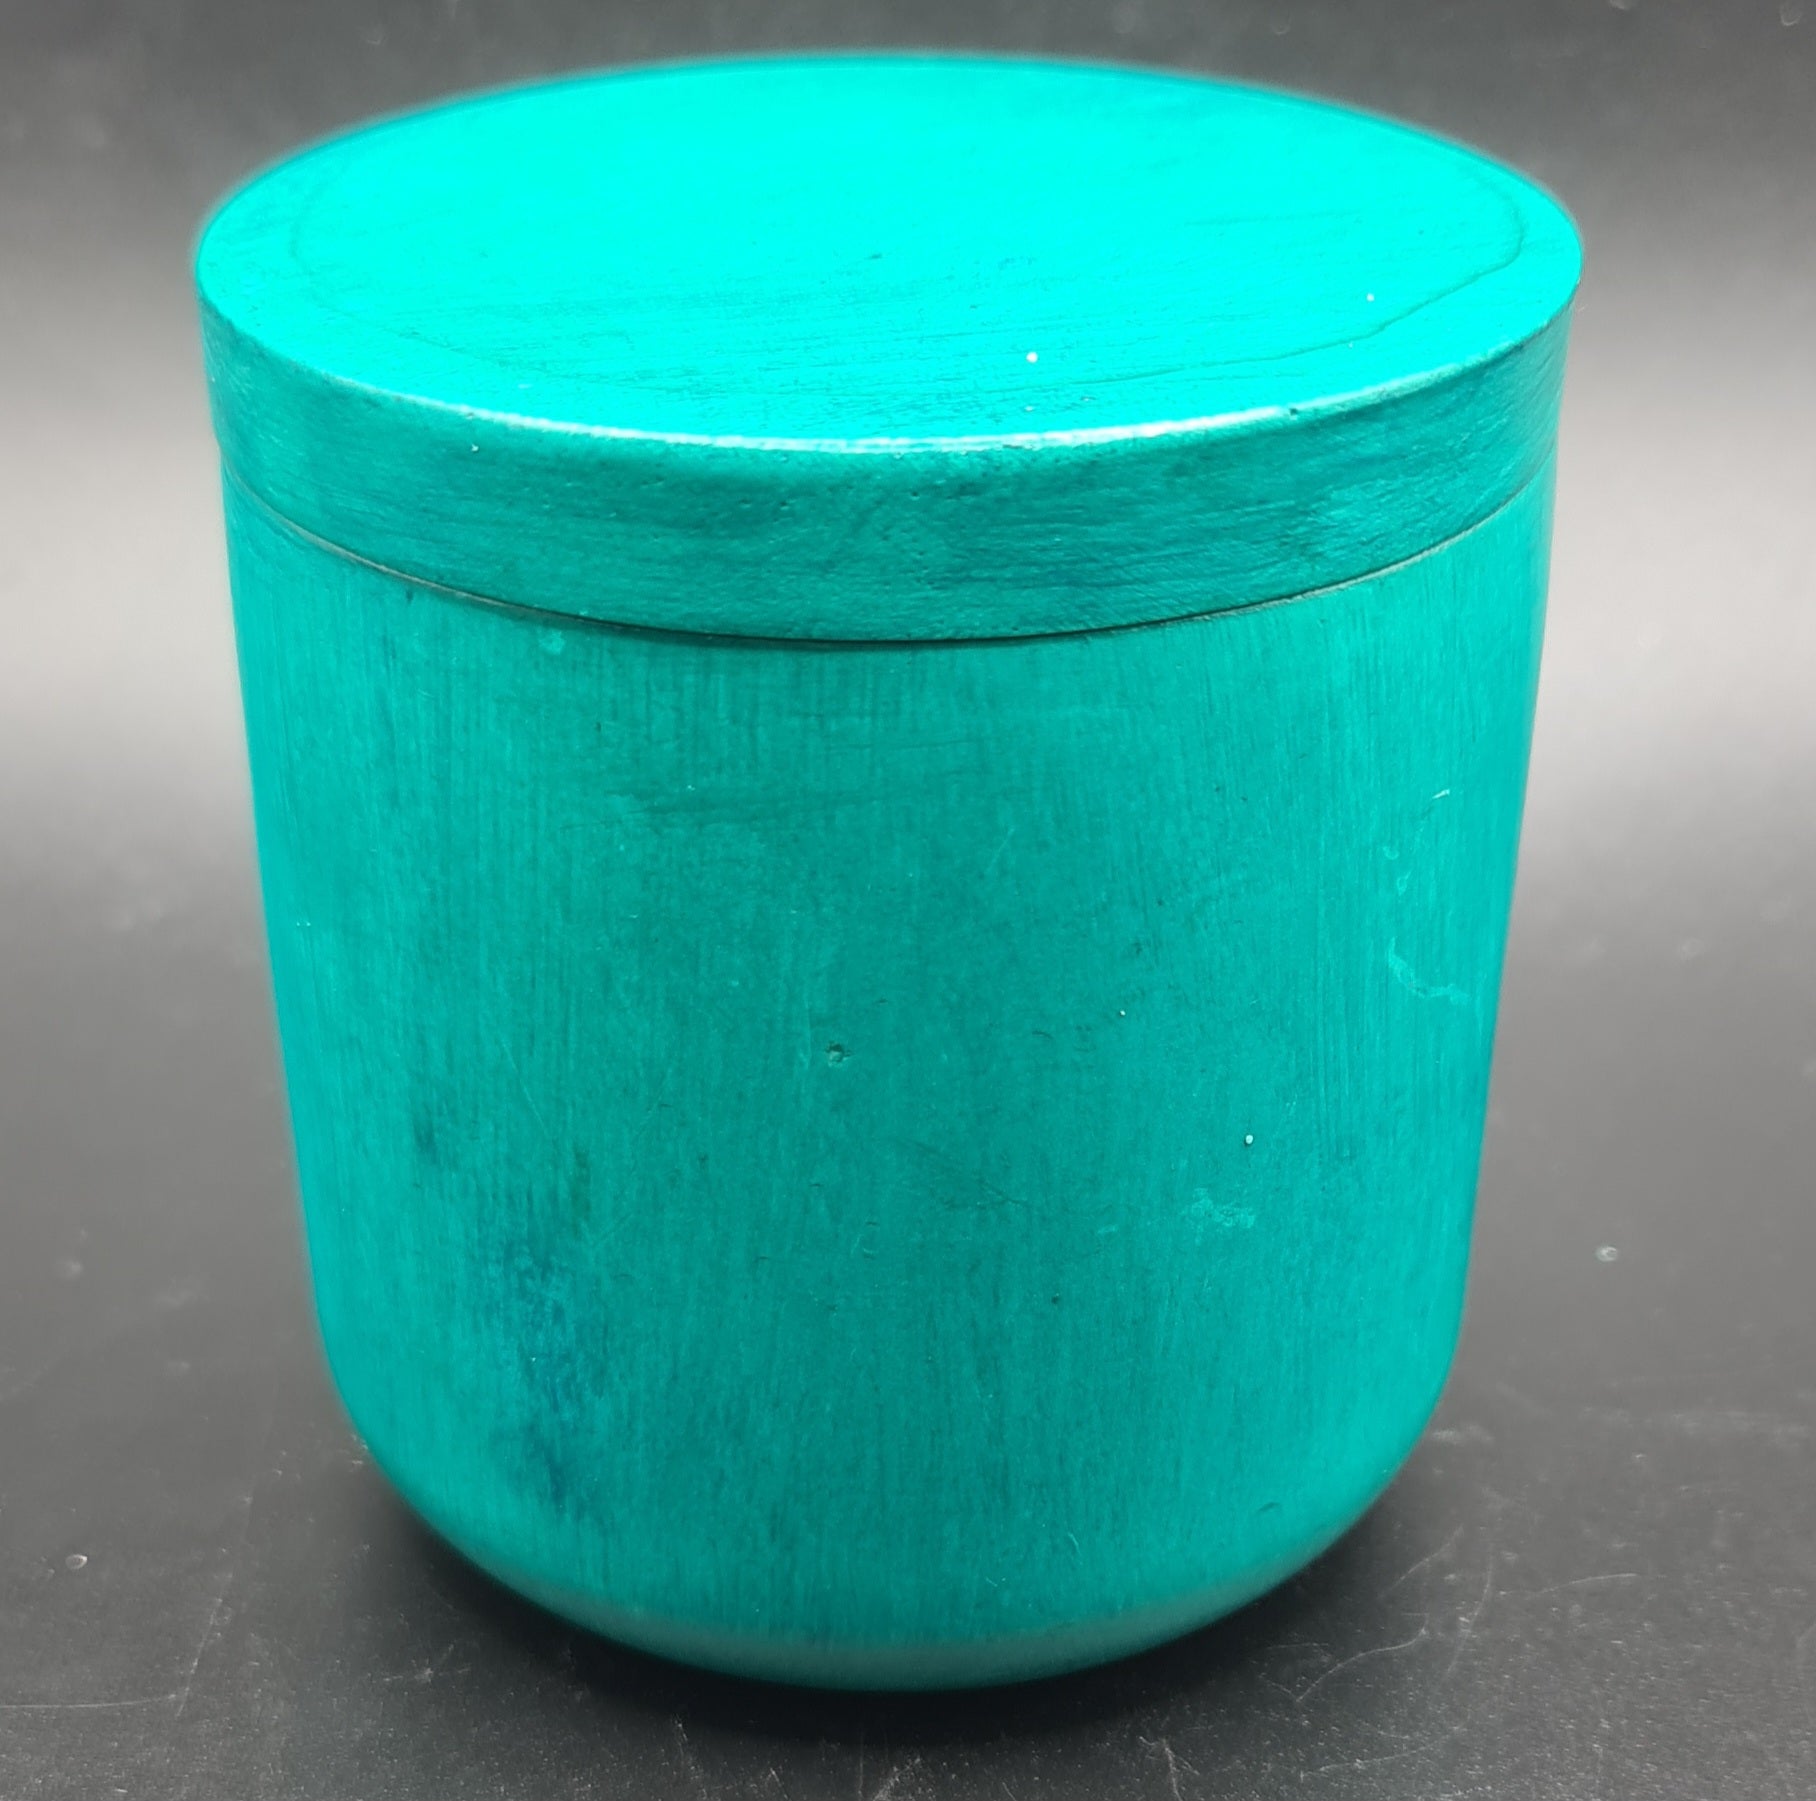 Minimalist simple-pot candle, perfect for understated elegance in any setting